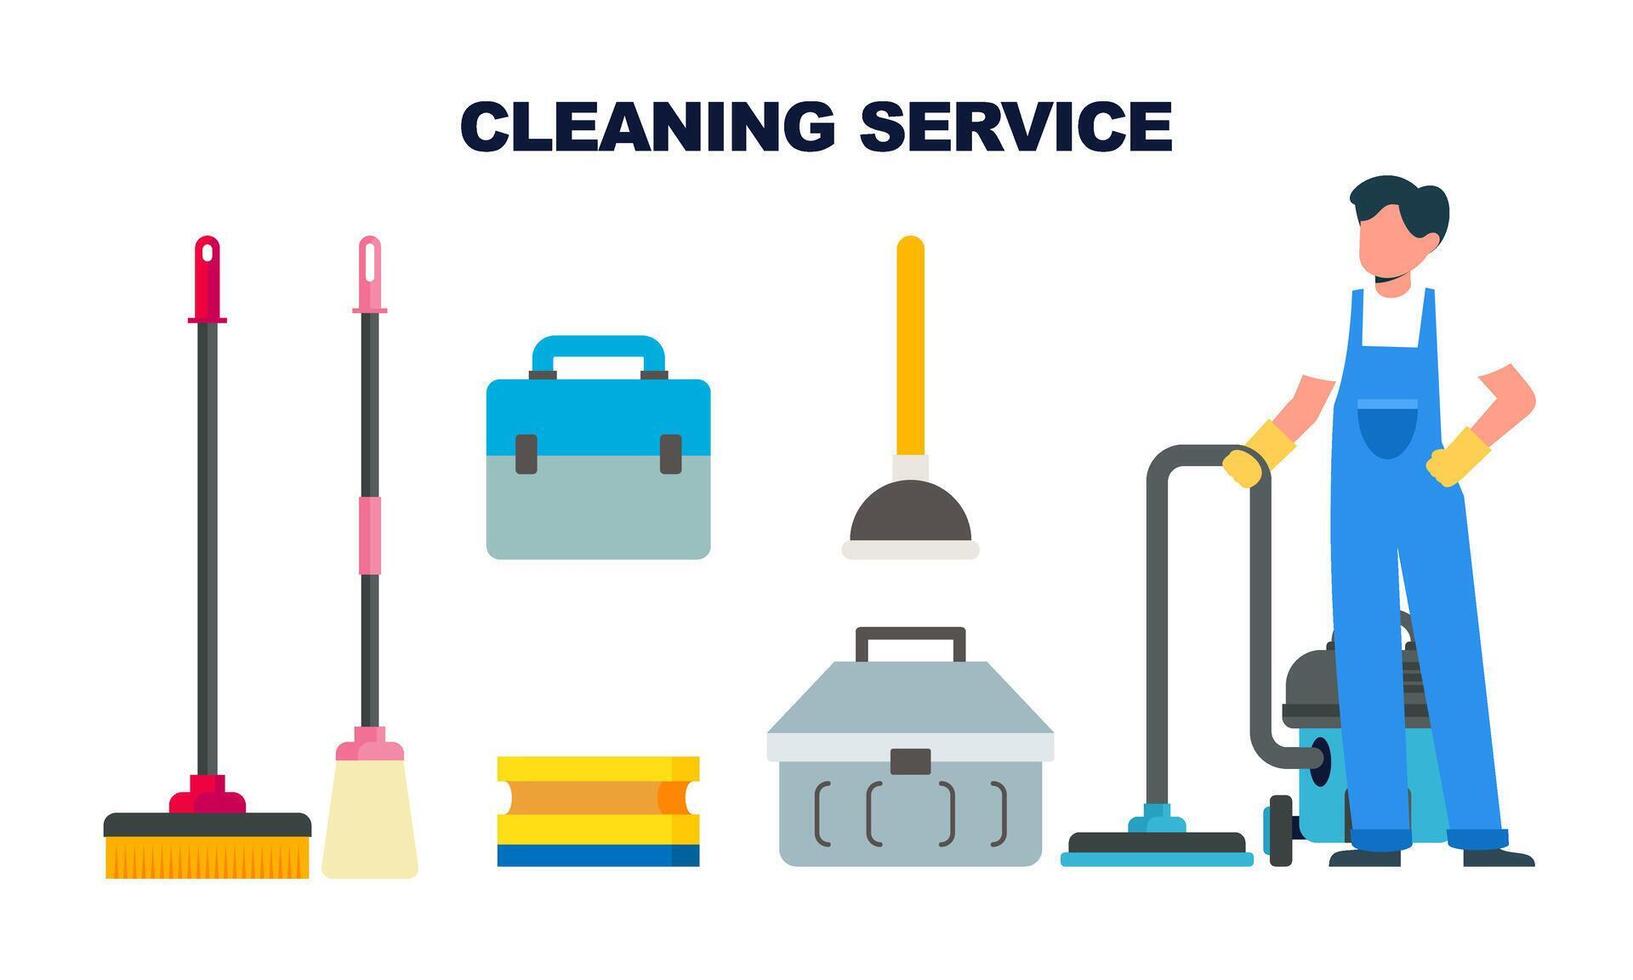 Cleaning service equipment clean worker character concept vector